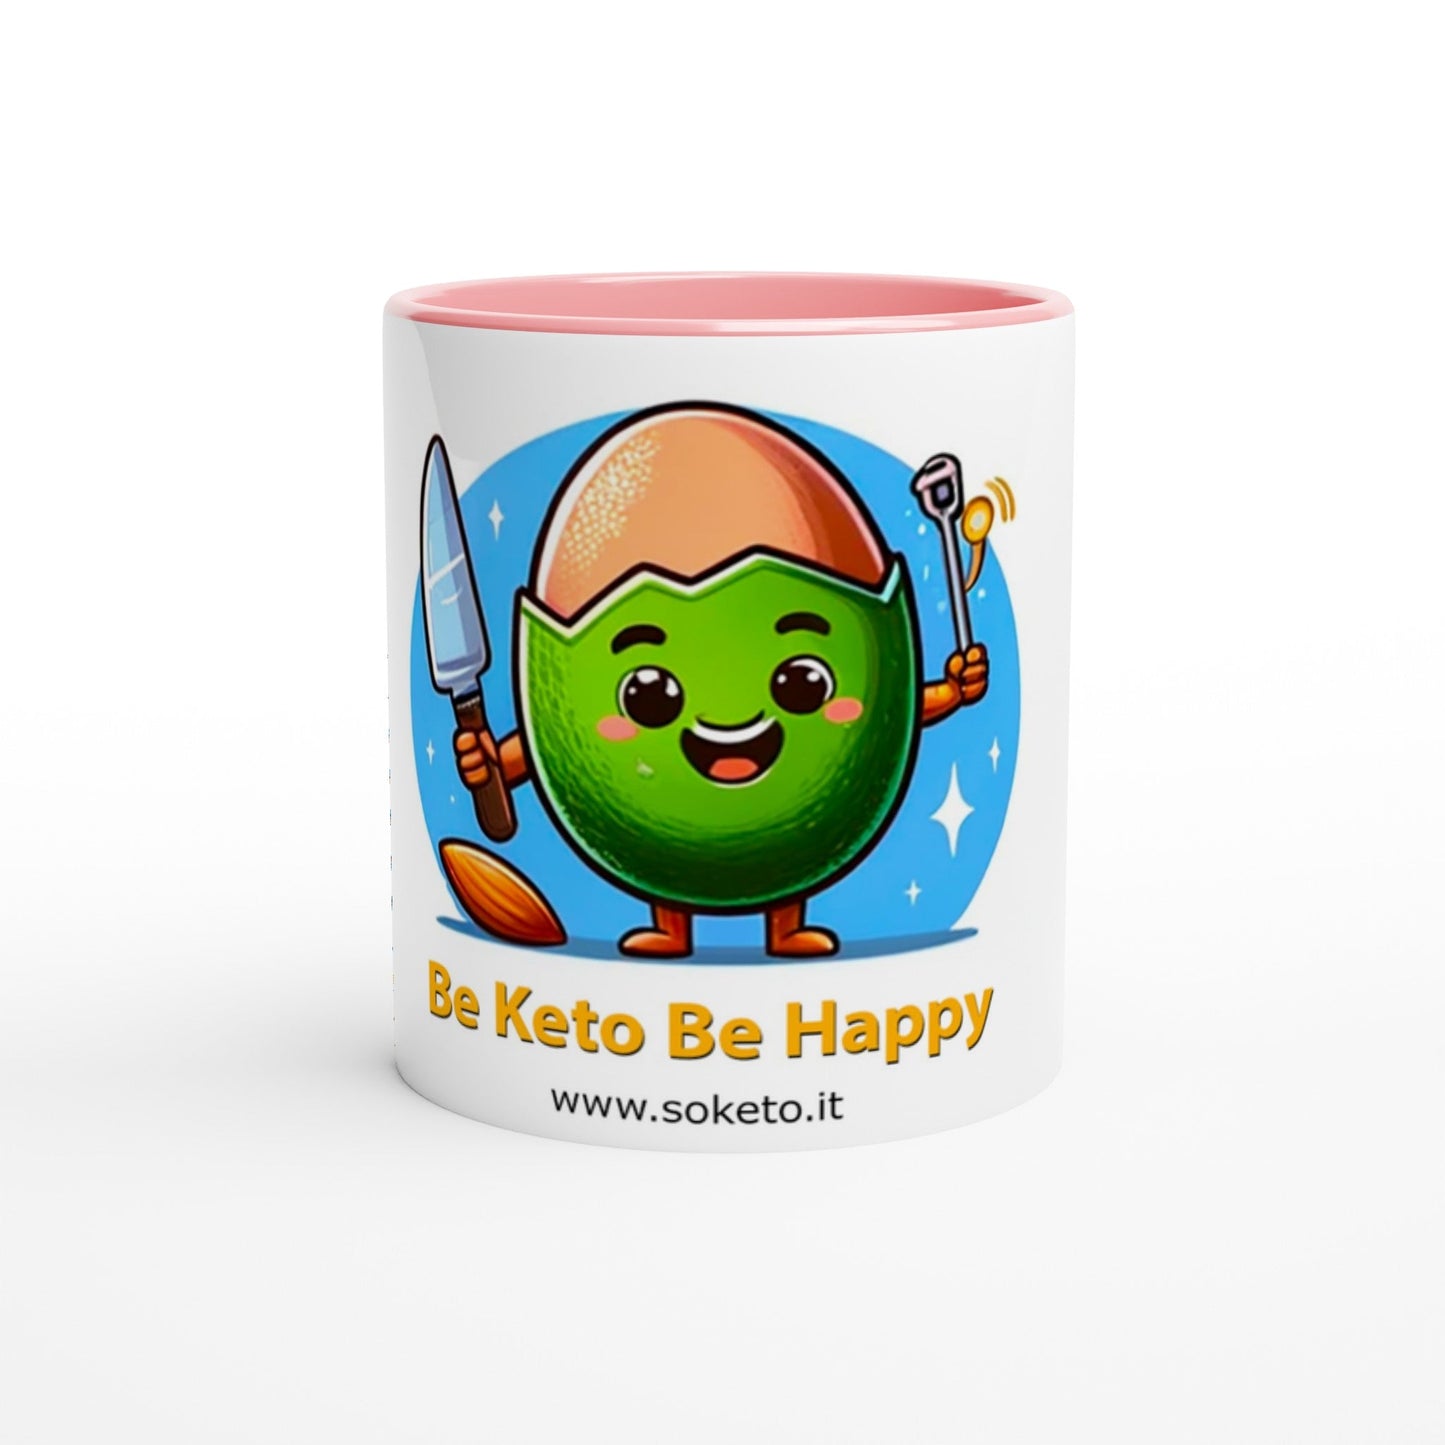 350ml "Be Keto Be Happy" Mug with Colored Interior - Start the Day with Style and Health-5